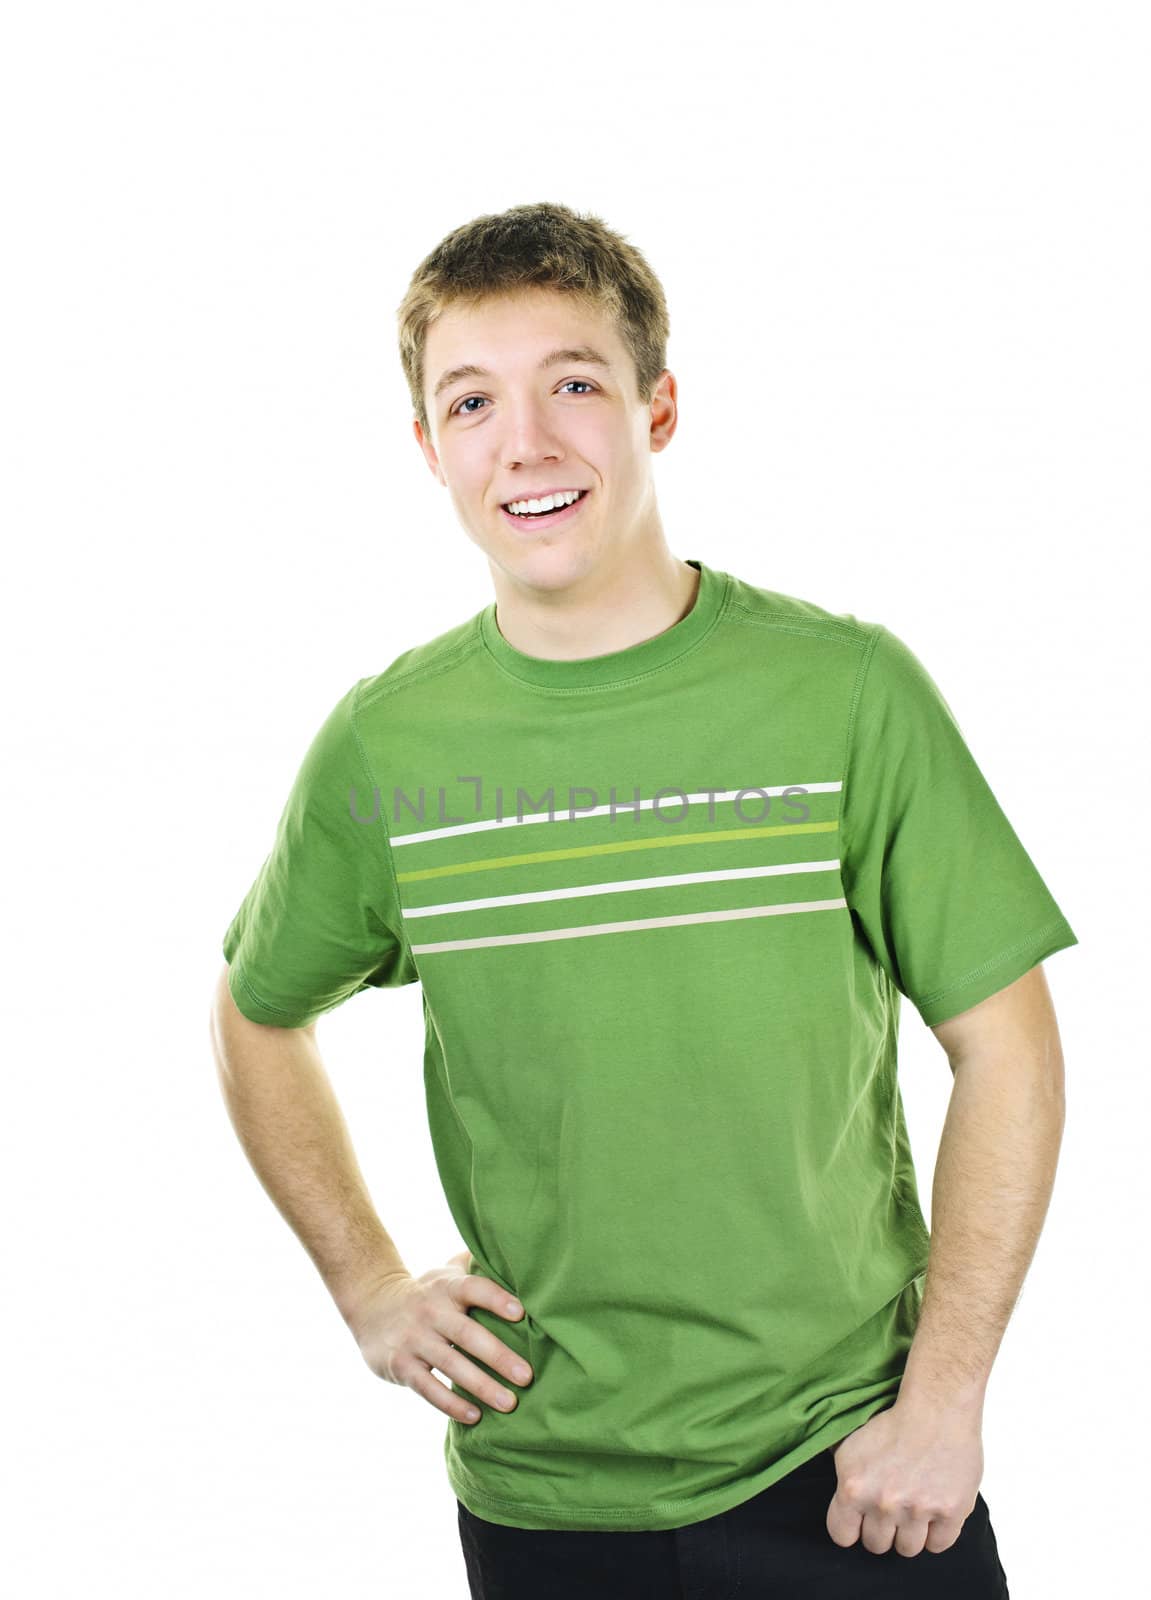 Happy young man standing isolated on white background